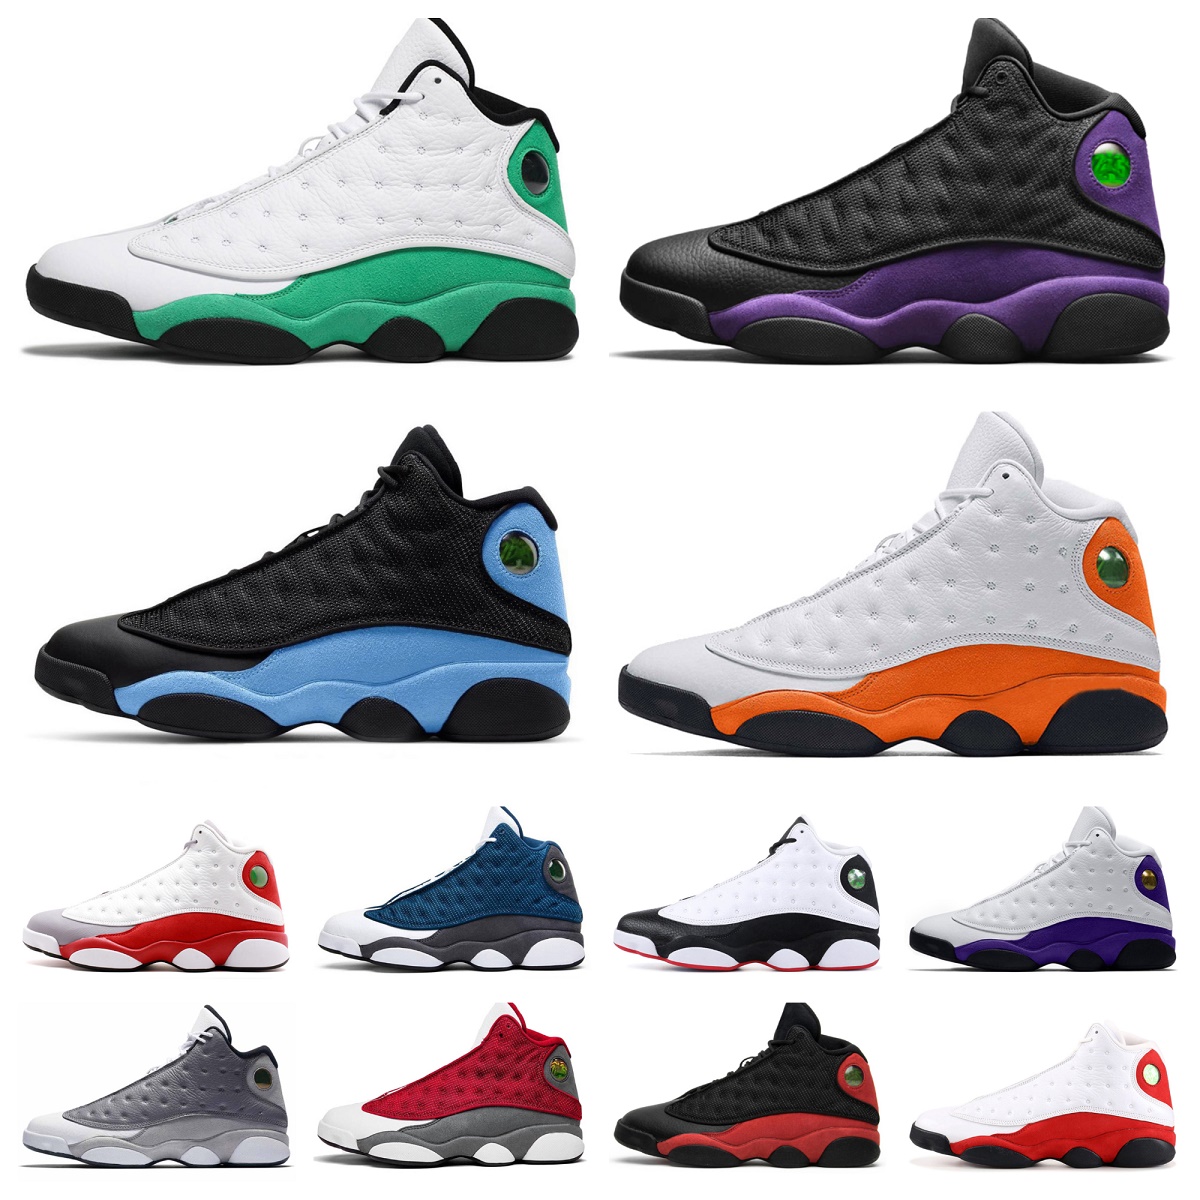 

Jumpman 13 13S Basketball Shoes Mens High Brave Blue Flint Bred Island Green Red Dirty Hyper Royal Starfish He Got Game Black Cat Court Purple Grey Toe Chicago Sneakers, H028